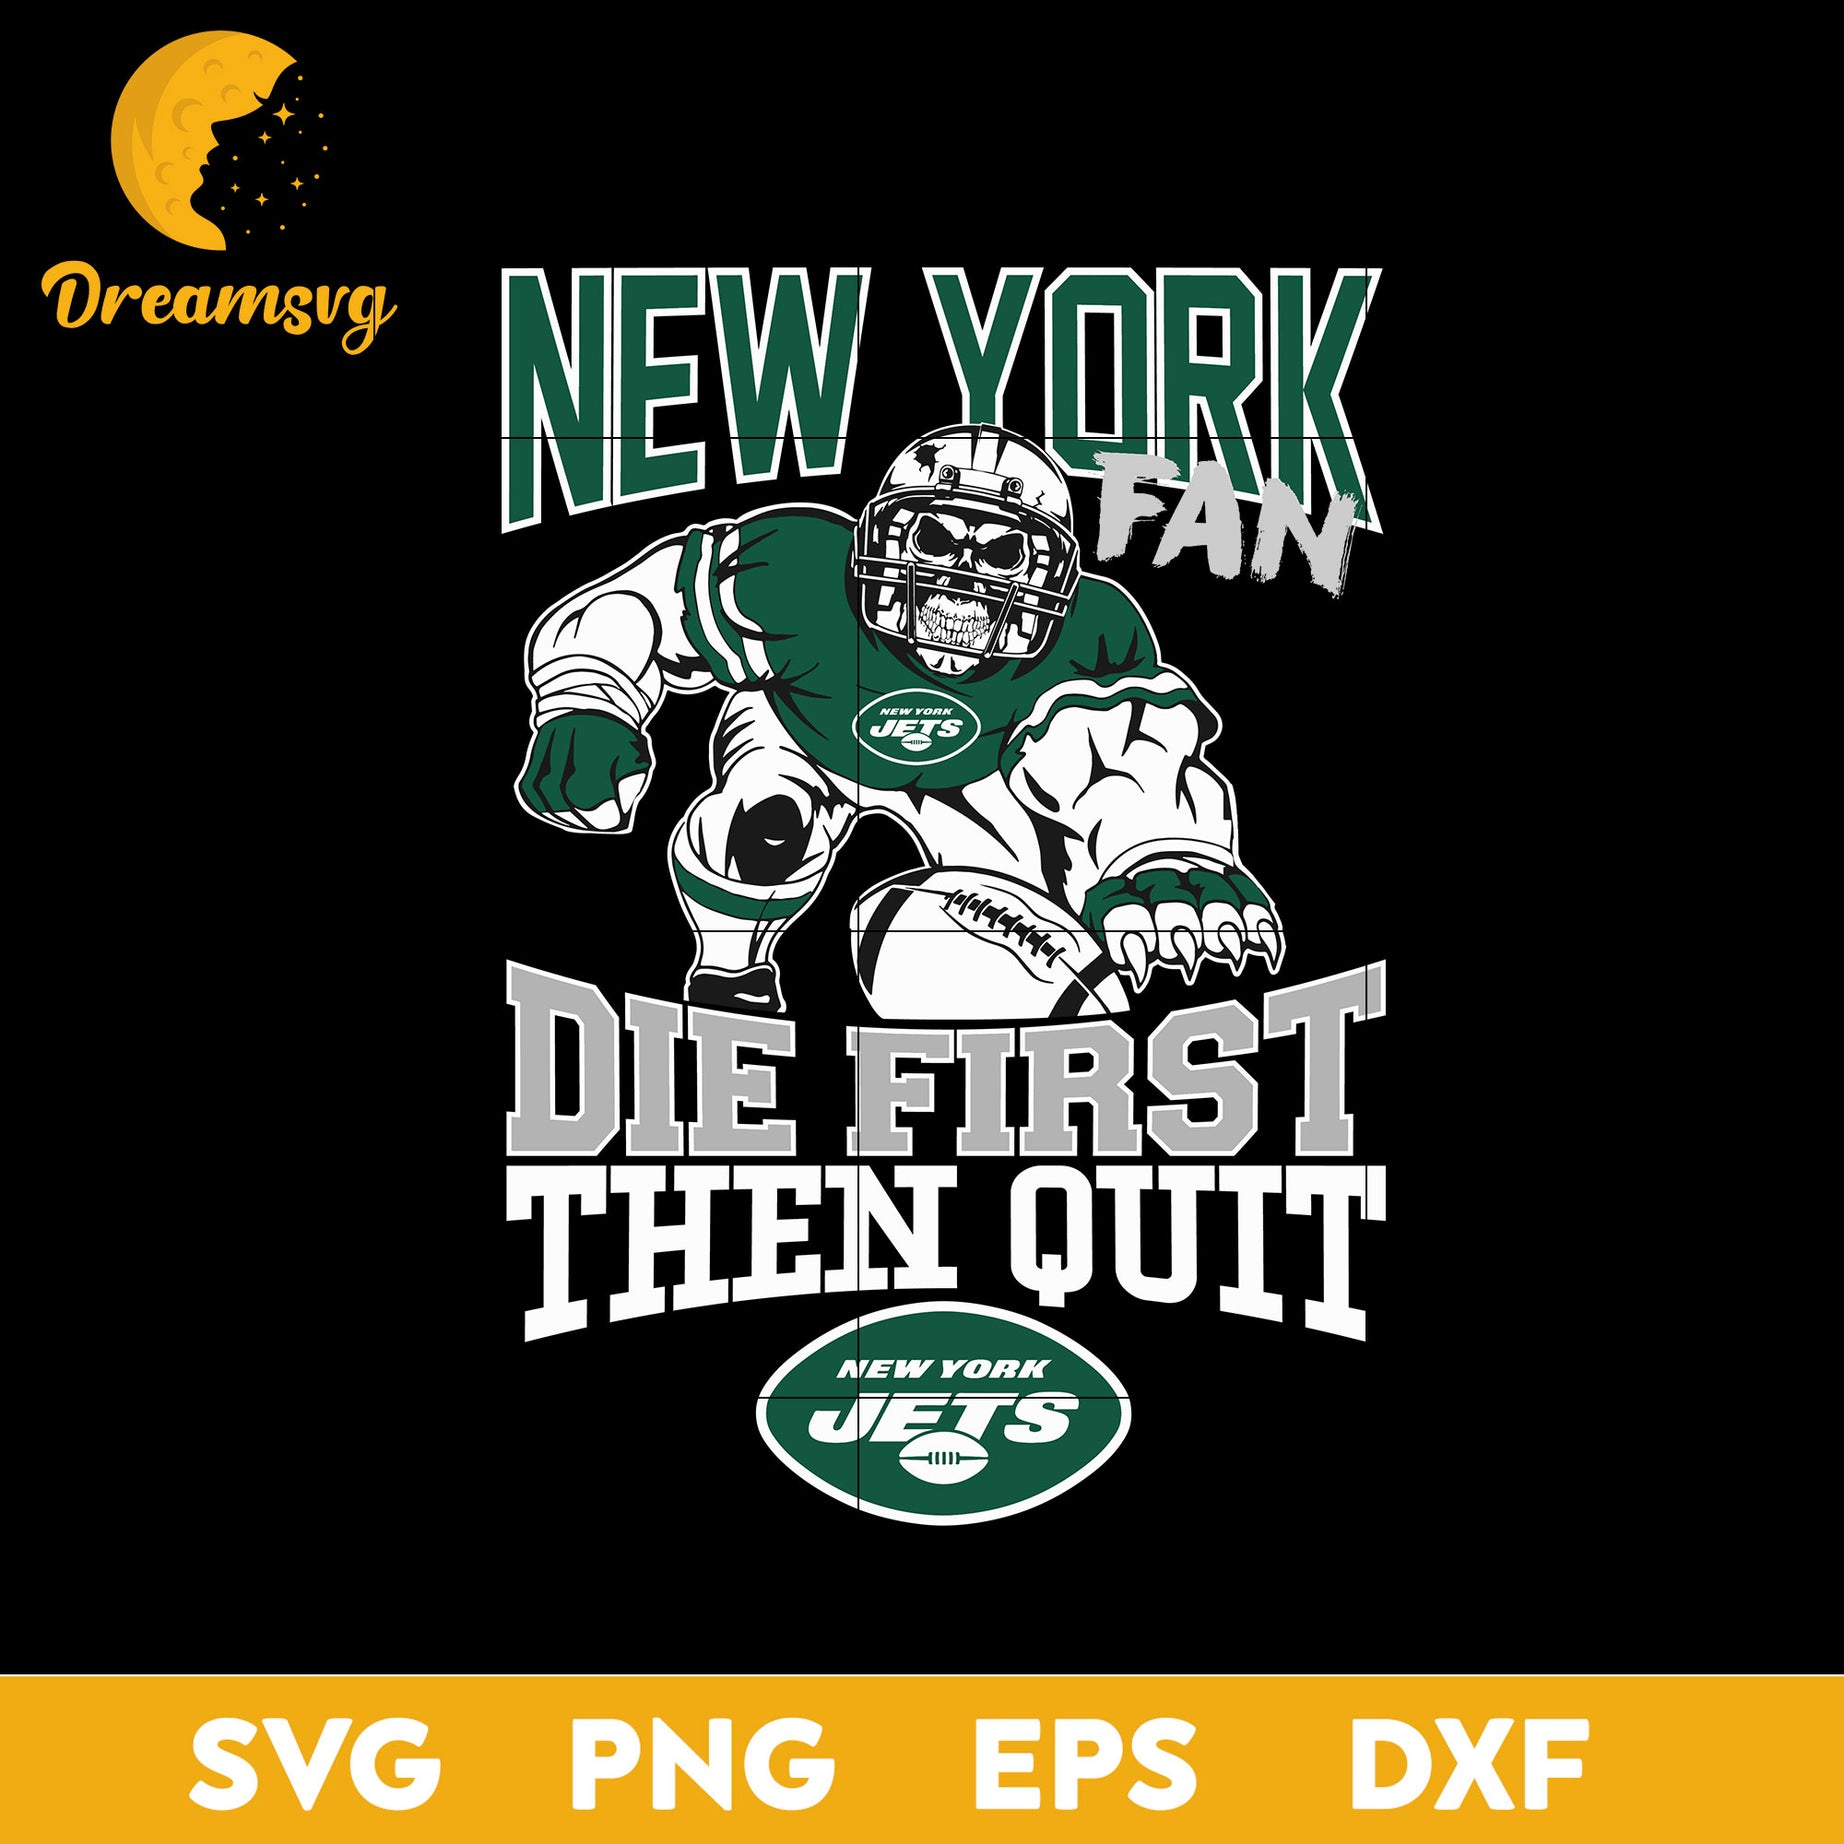 New York Jets Fan Die First Then Quit Svg, New York Jets Svg, Png, Dxf, Eps file.